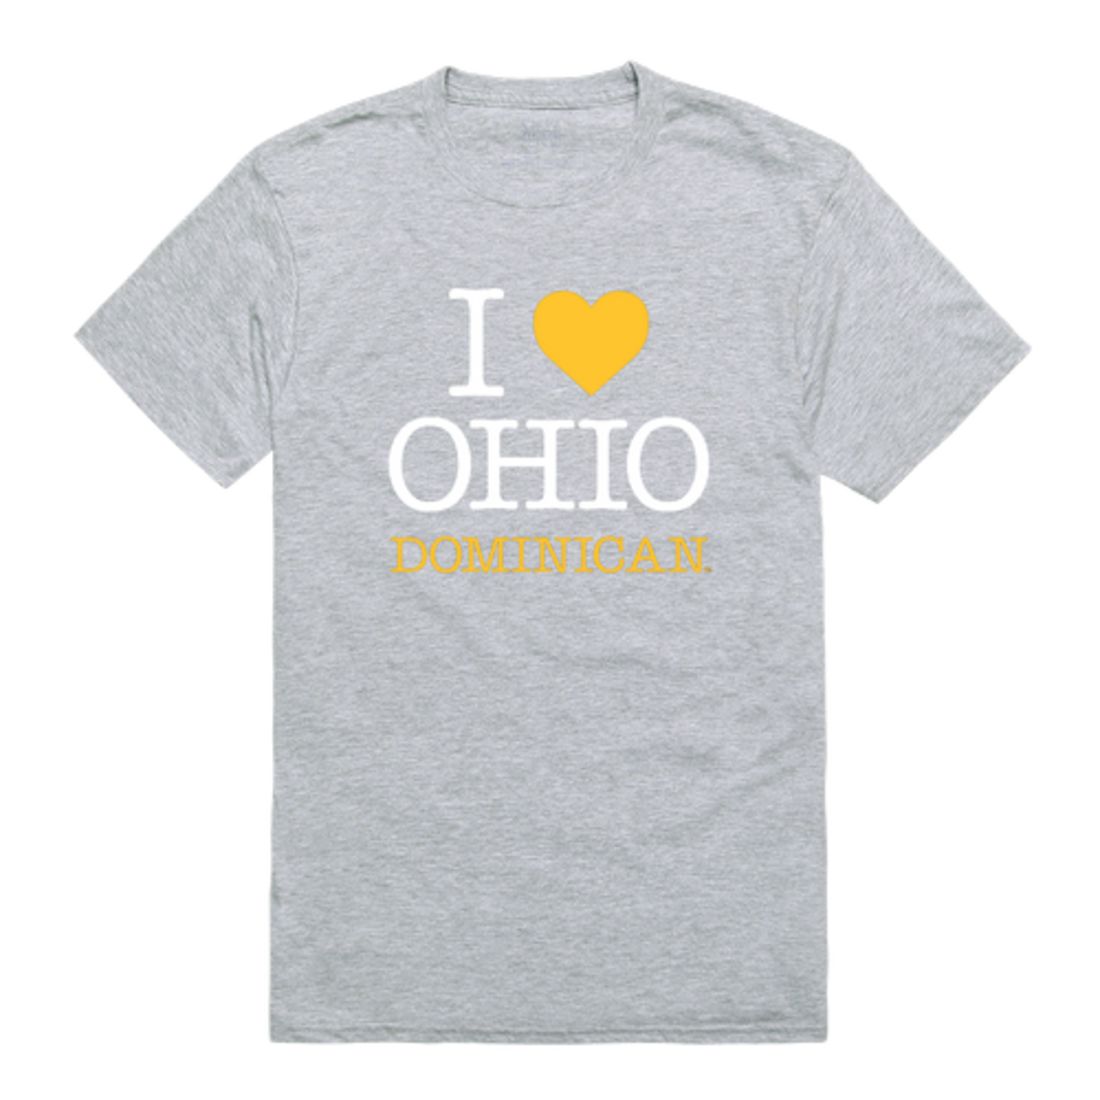 I Love Ohio Dominican University Panthers T-Shirt Tee